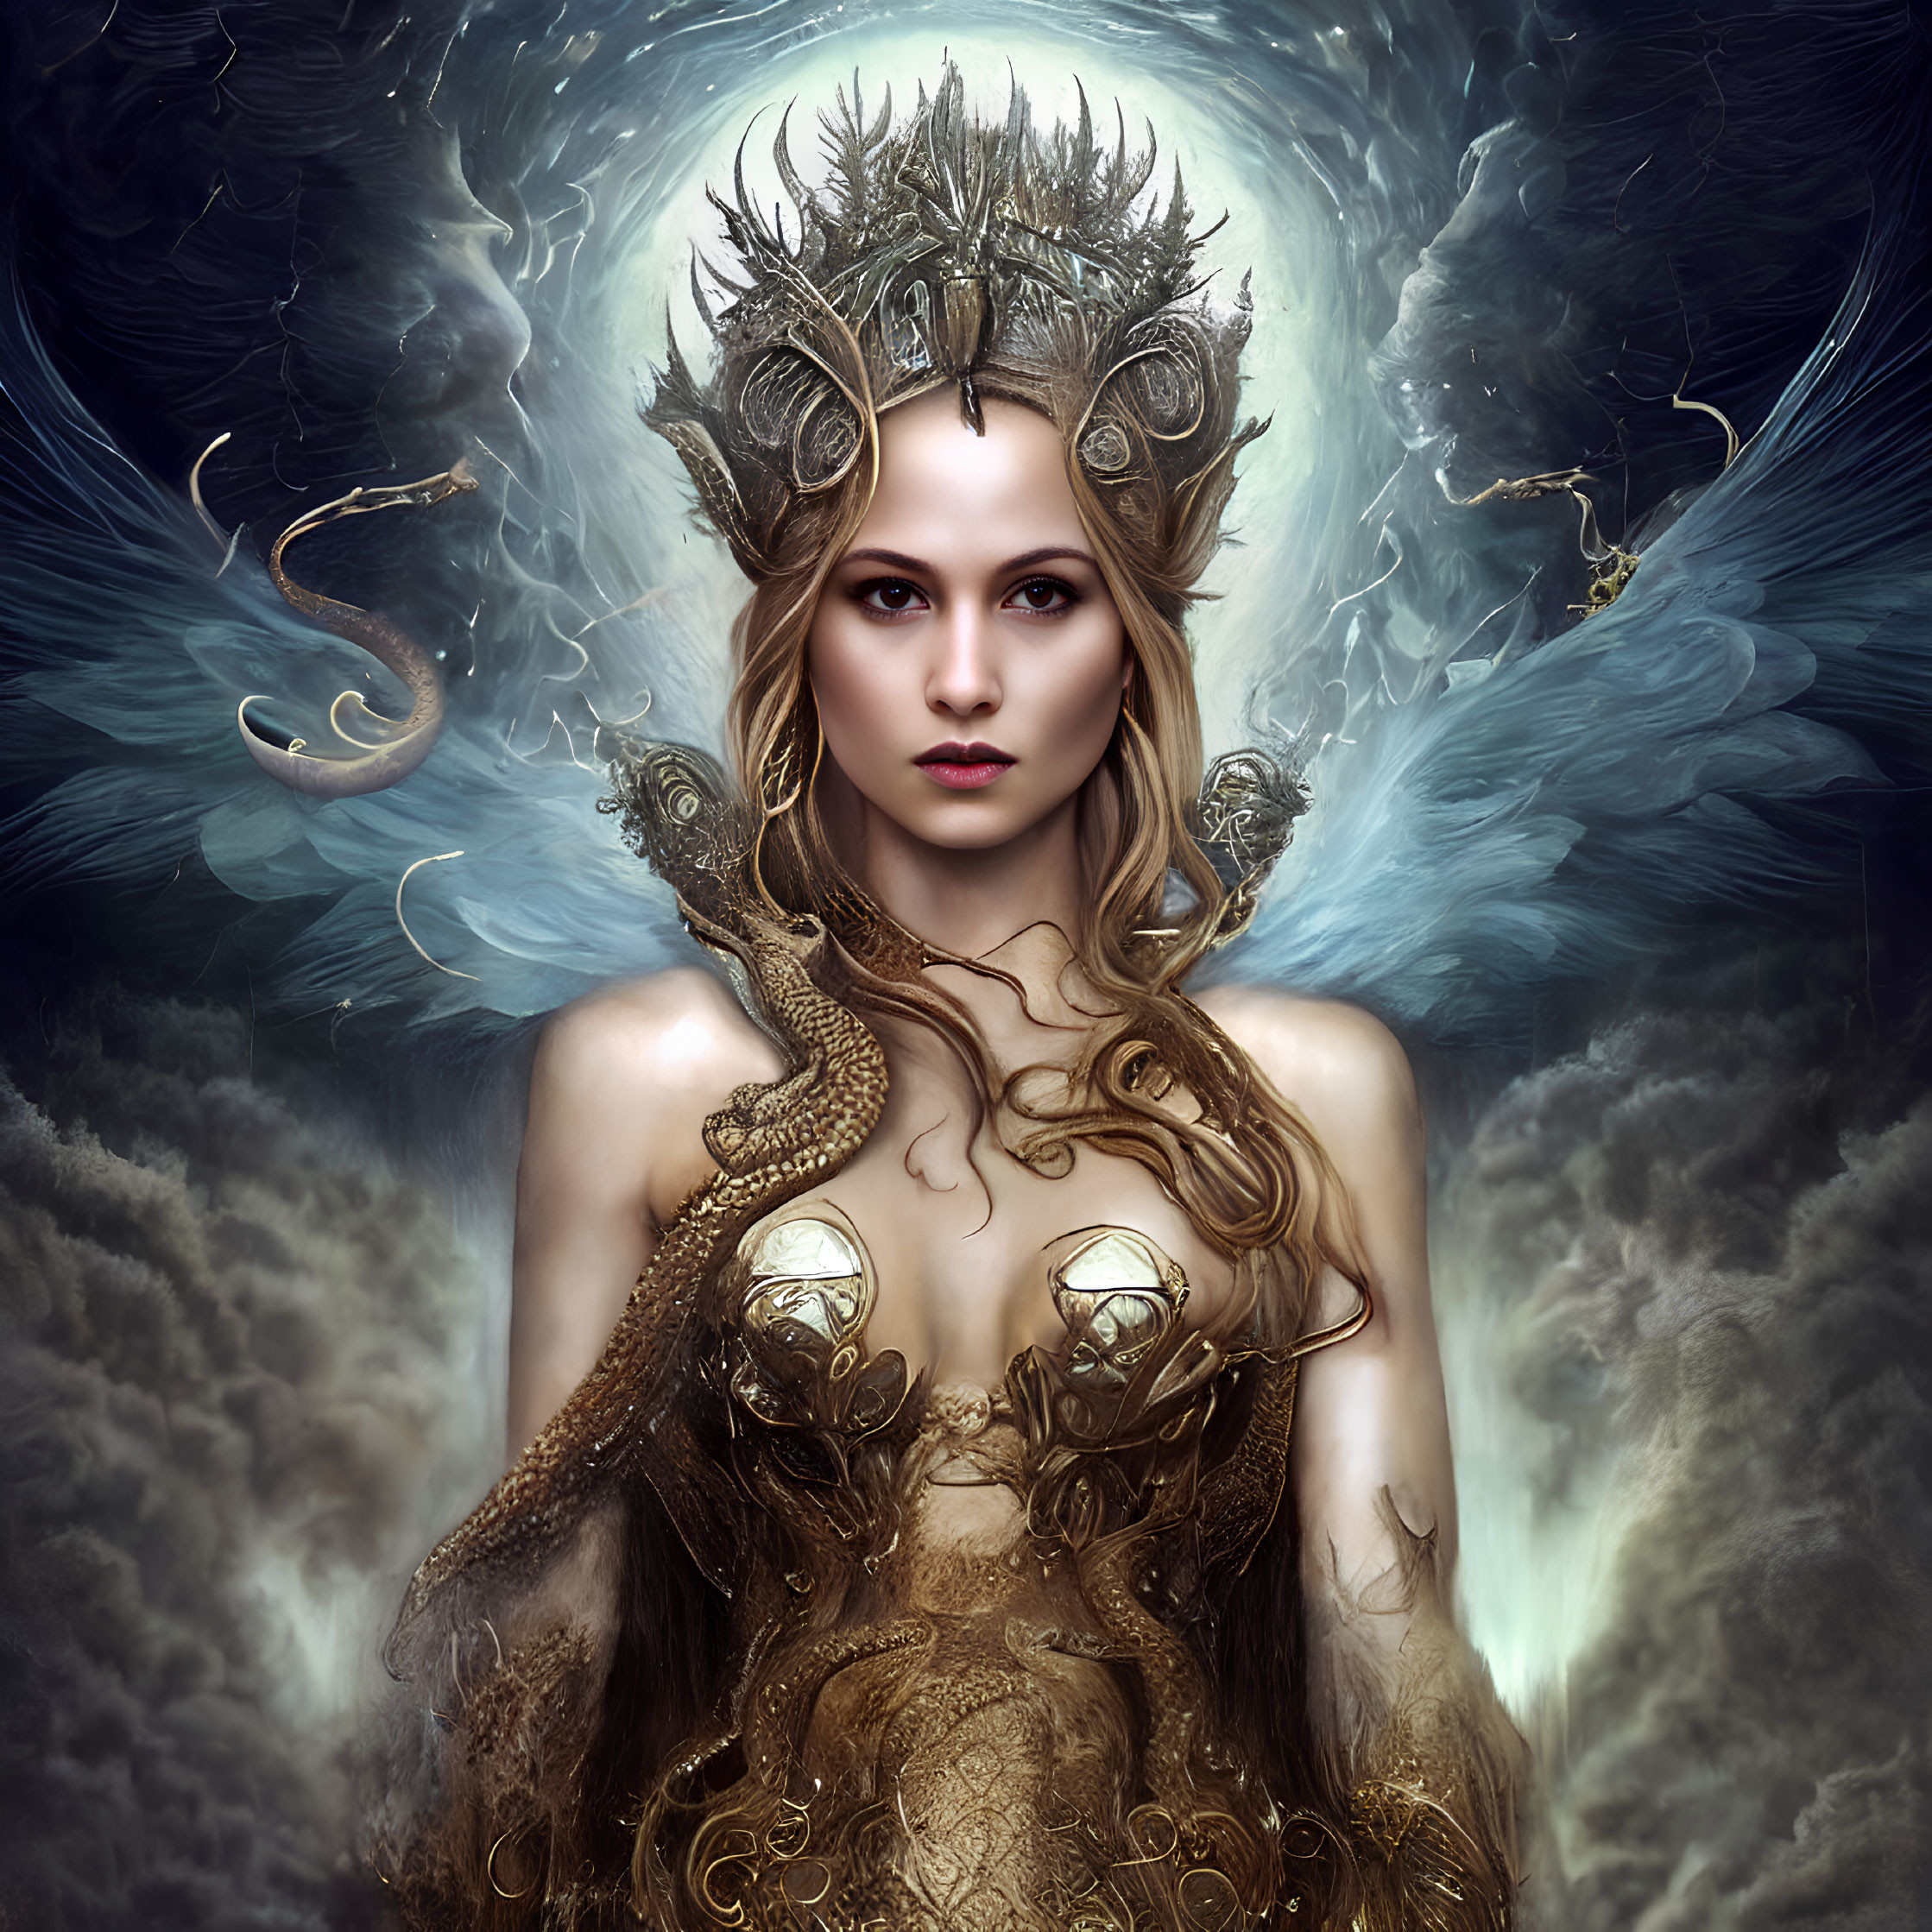 Regal woman with branch crown and serpents in golden attire on mystical blue backdrop